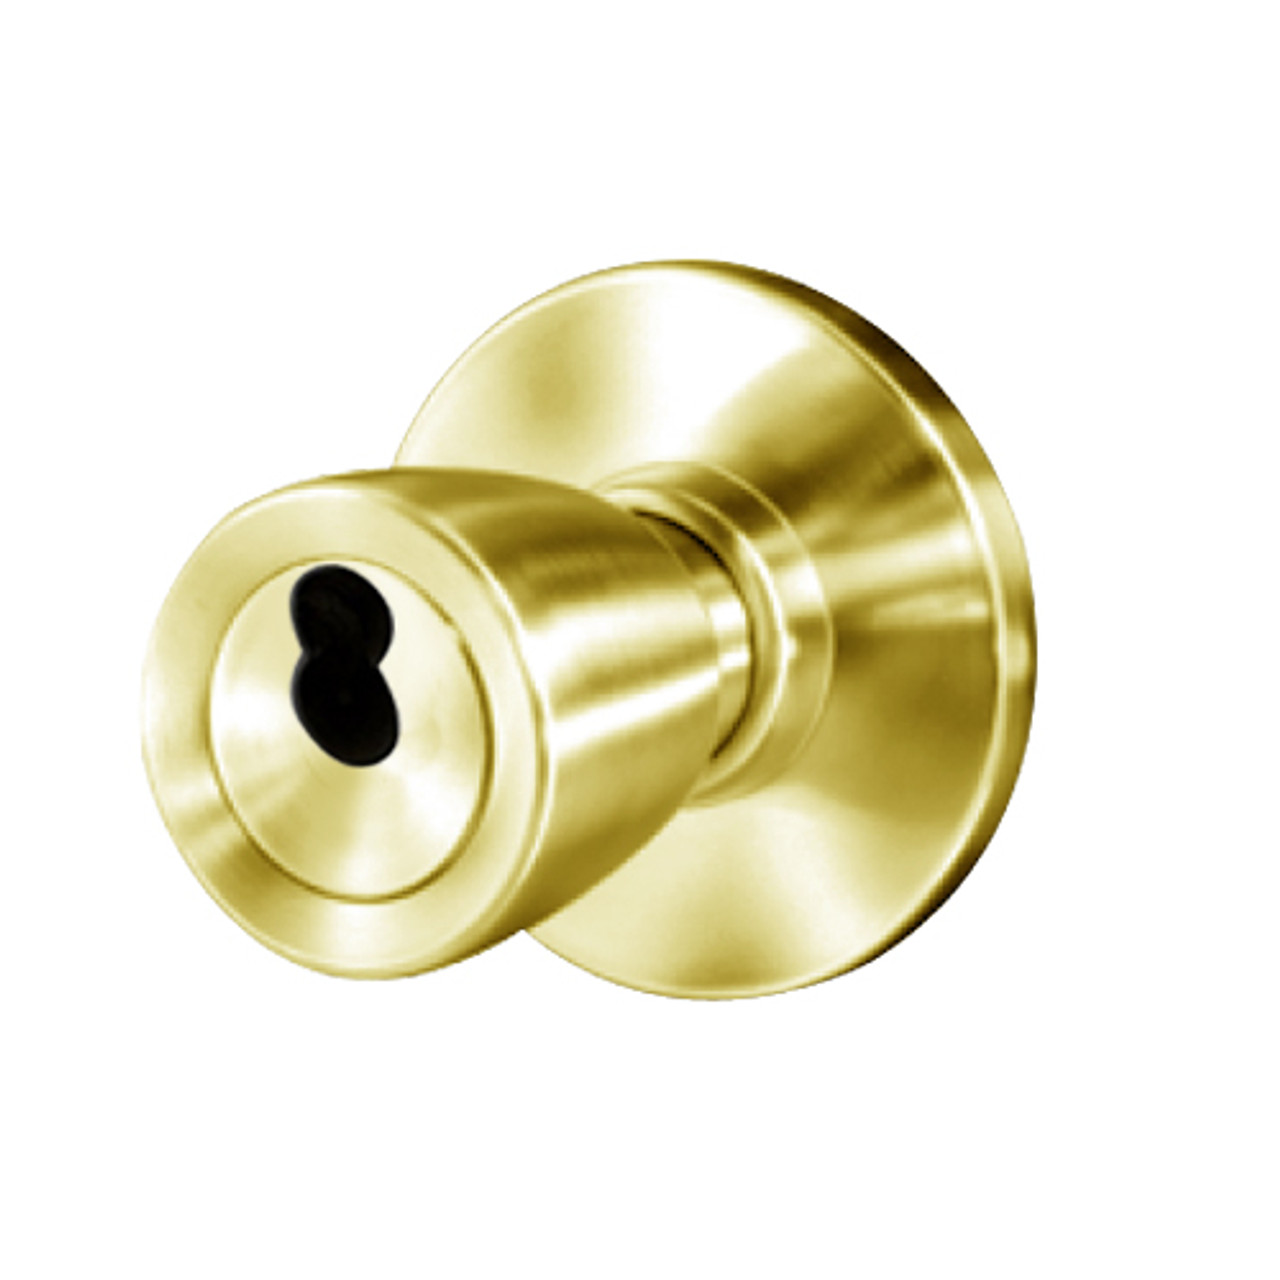 8K47YD6AS3605 Best 8K Series Exit Heavy Duty Cylindrical Knob Locks with Tulip Style in Bright Brass